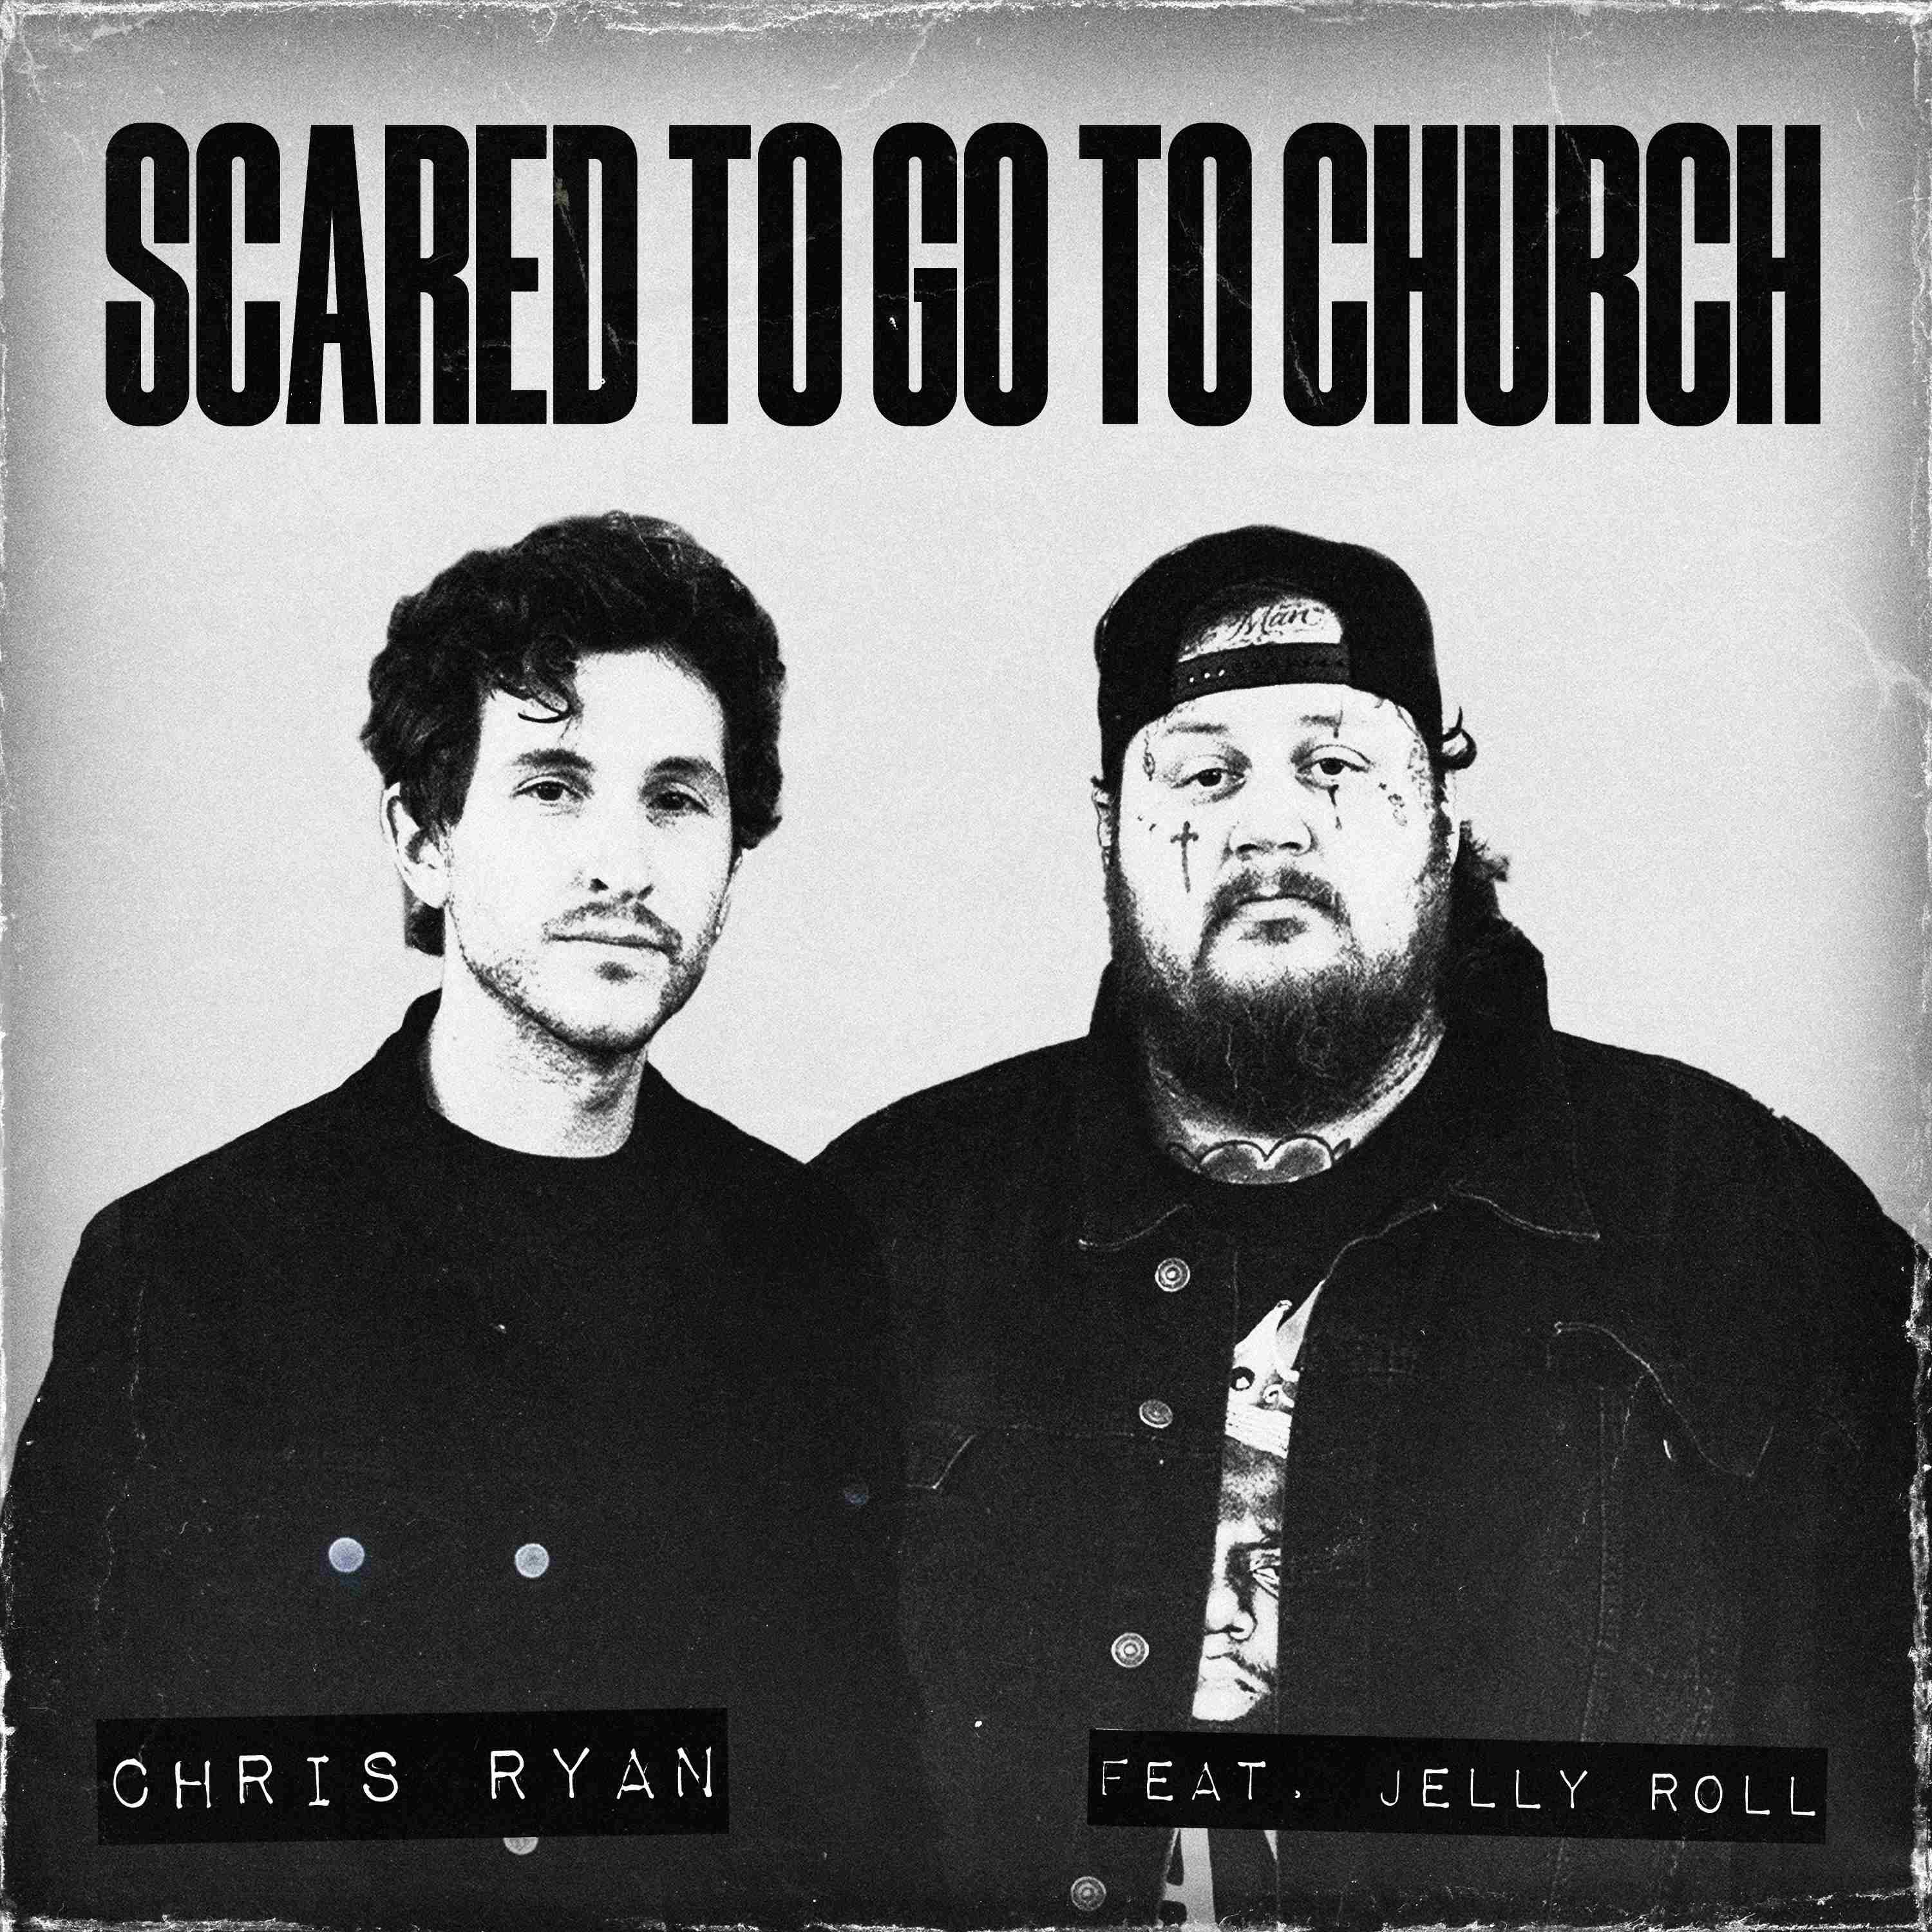 SCARED TO GO TO CHURCH